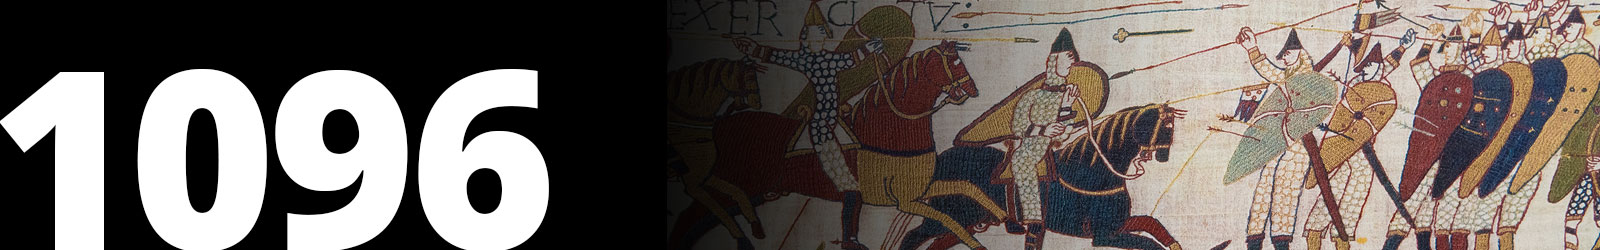 1096 banner for the history timeline, featuring an image of the Bayeux Tapestry